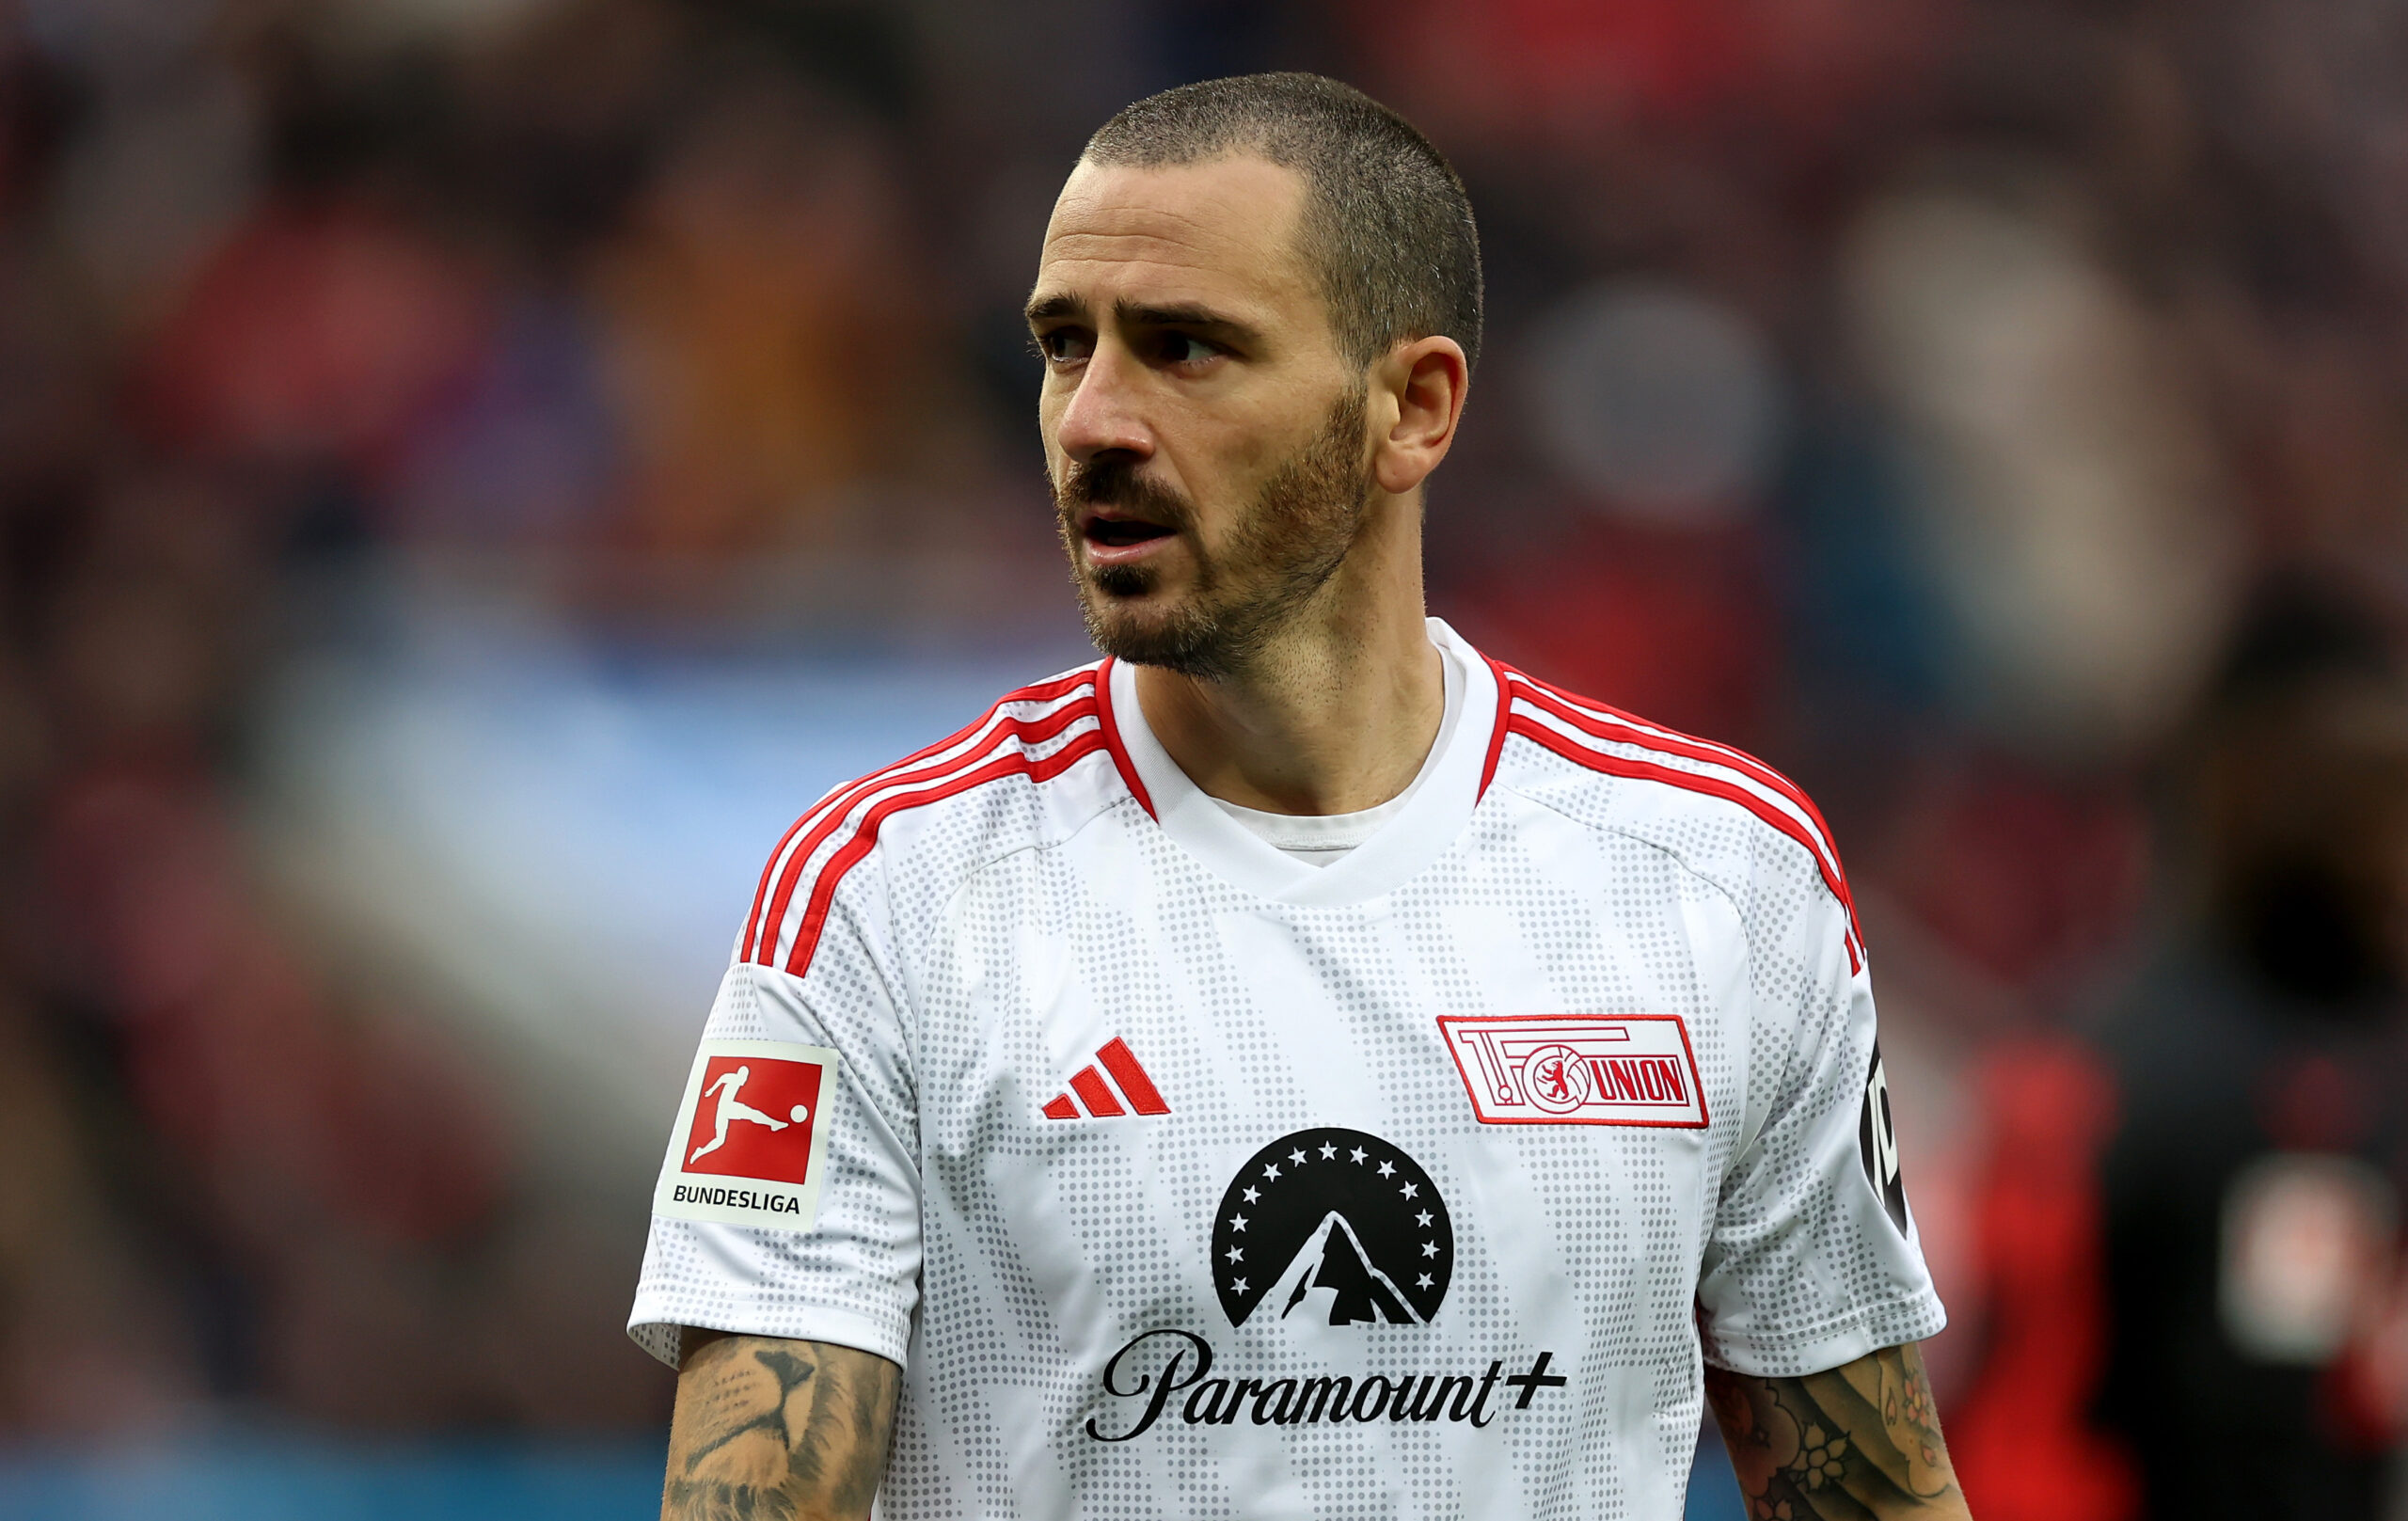 Leonardo Bonucci was on the verge of coming to terms with Roma director Tiago Pinto, but the club’s ownership came over the top to block the deal.